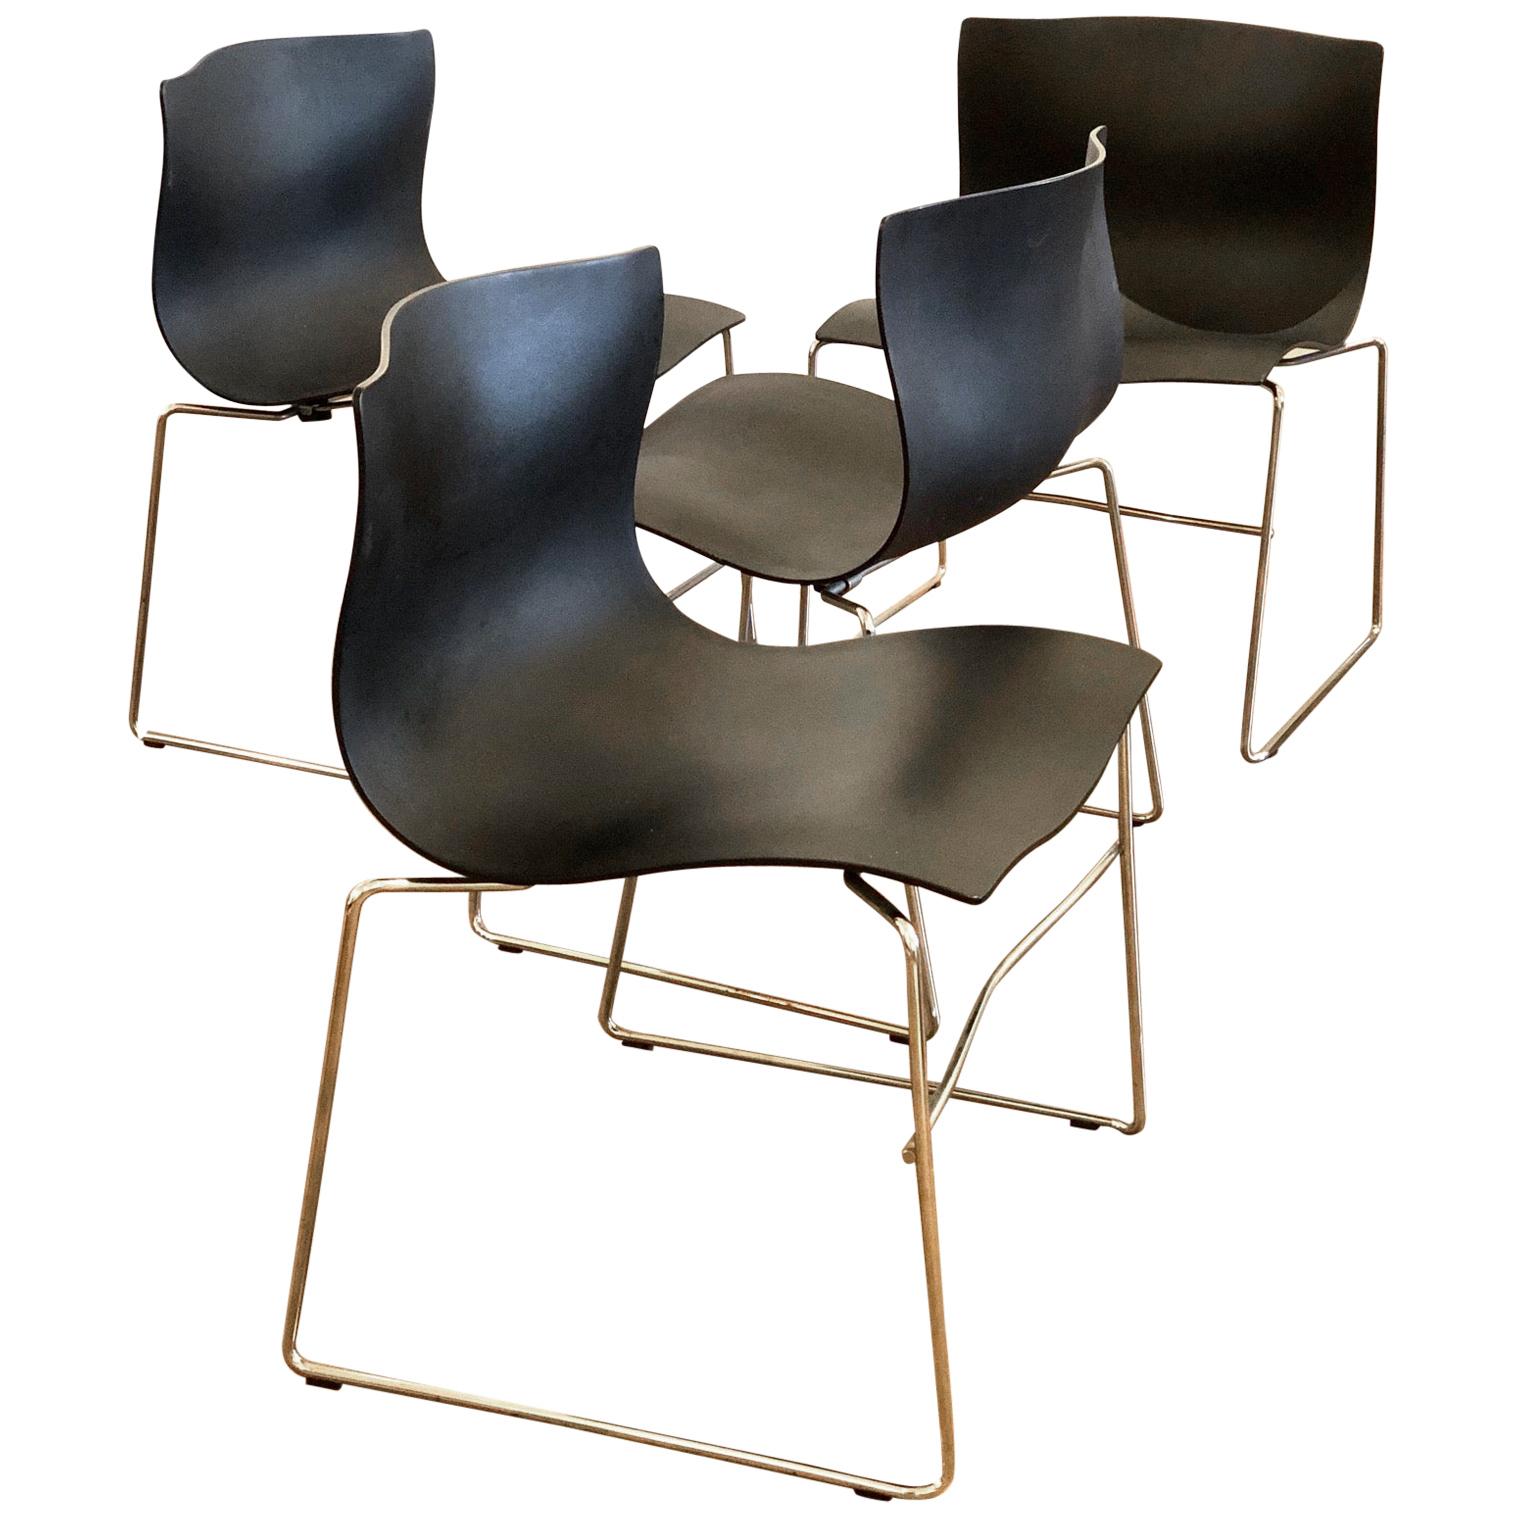 Set of 4 Handkerchief Chairs in Black & Chrome Designed by Vignelli for Knoll